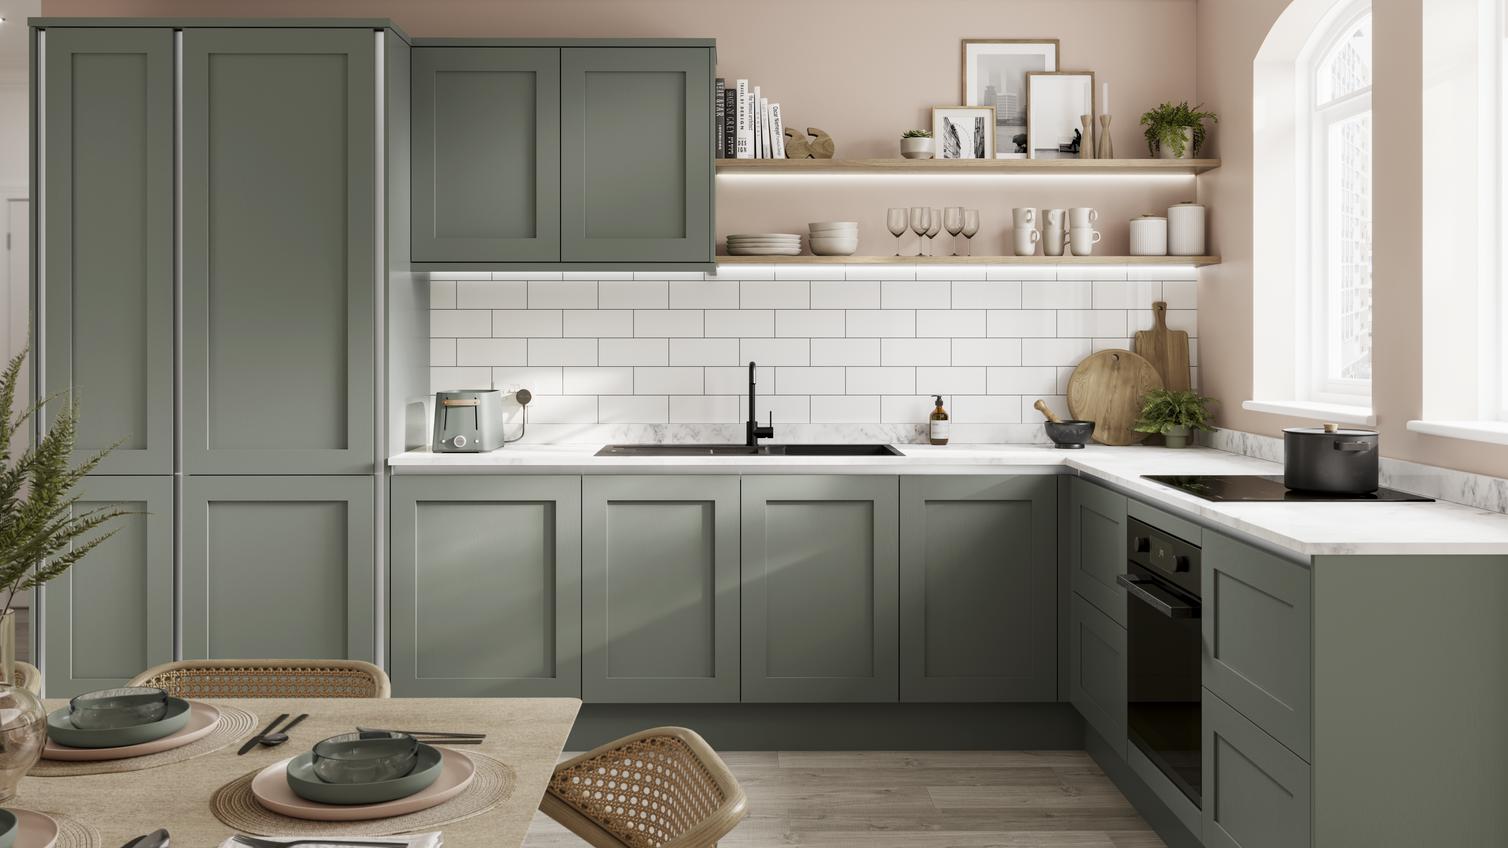 A reed green handleless kitchen idea in an l-shaped layout, with white worktops, black fixtures, and white backboard tiles.